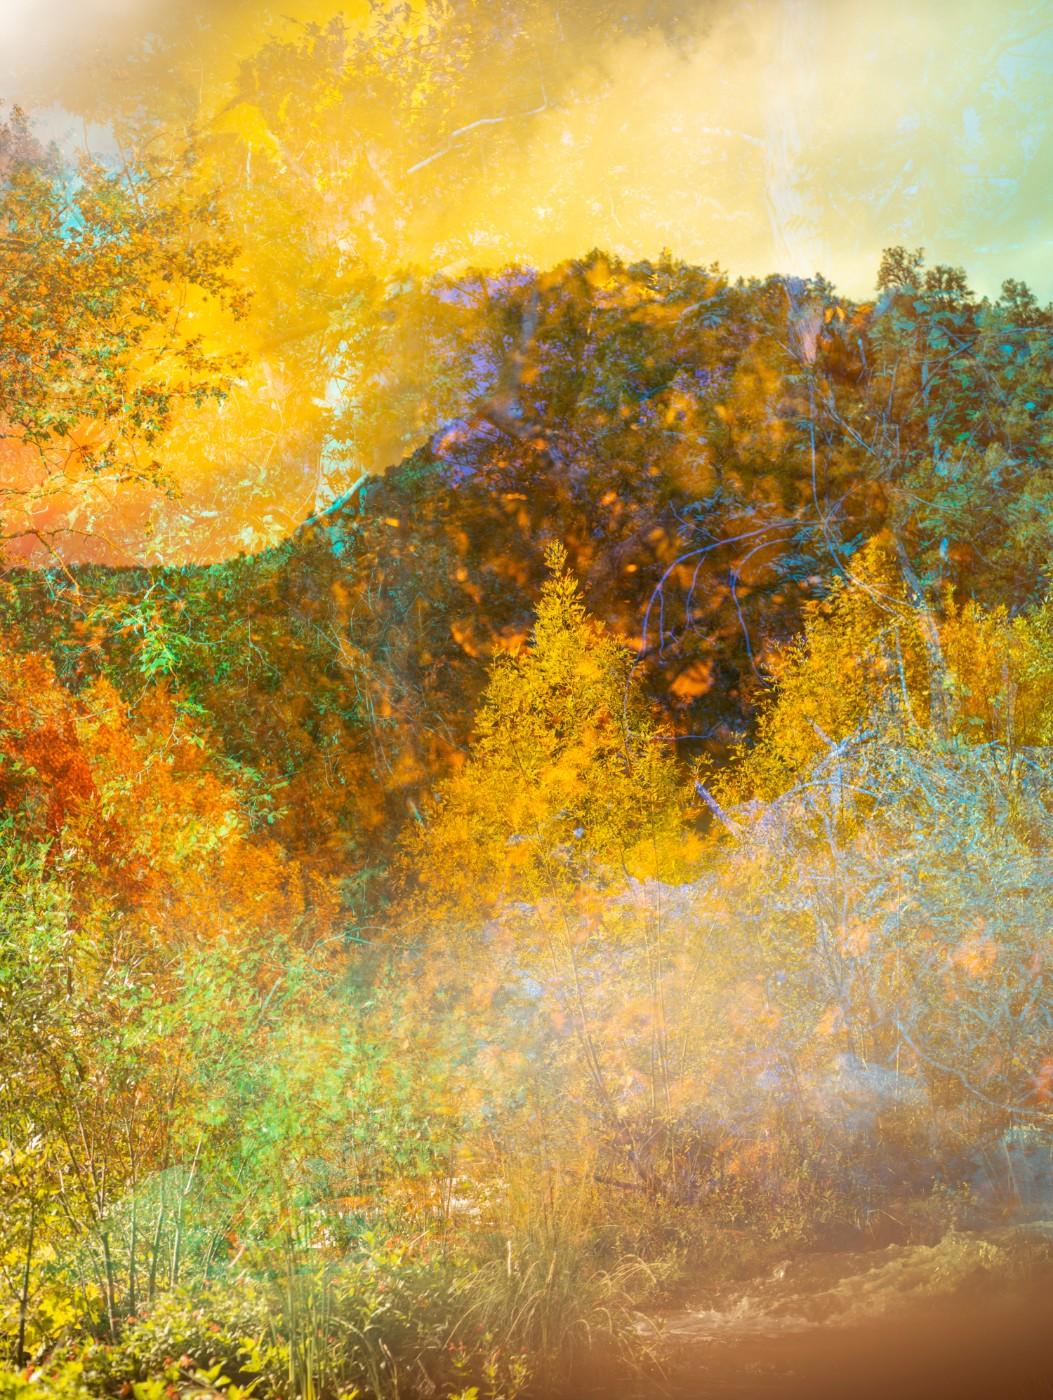 Terri Loewenthal, Psychscape 72 (Fossil Creek, AZ), 2018. Archival pigment print, 40 x 30 inches, Edition of 3 + 2AP.